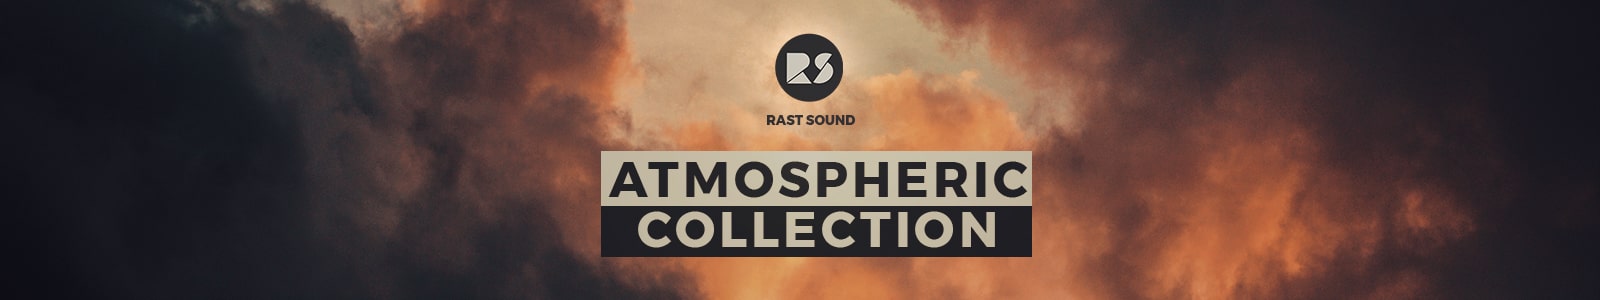 atmospheric collection by rast sound